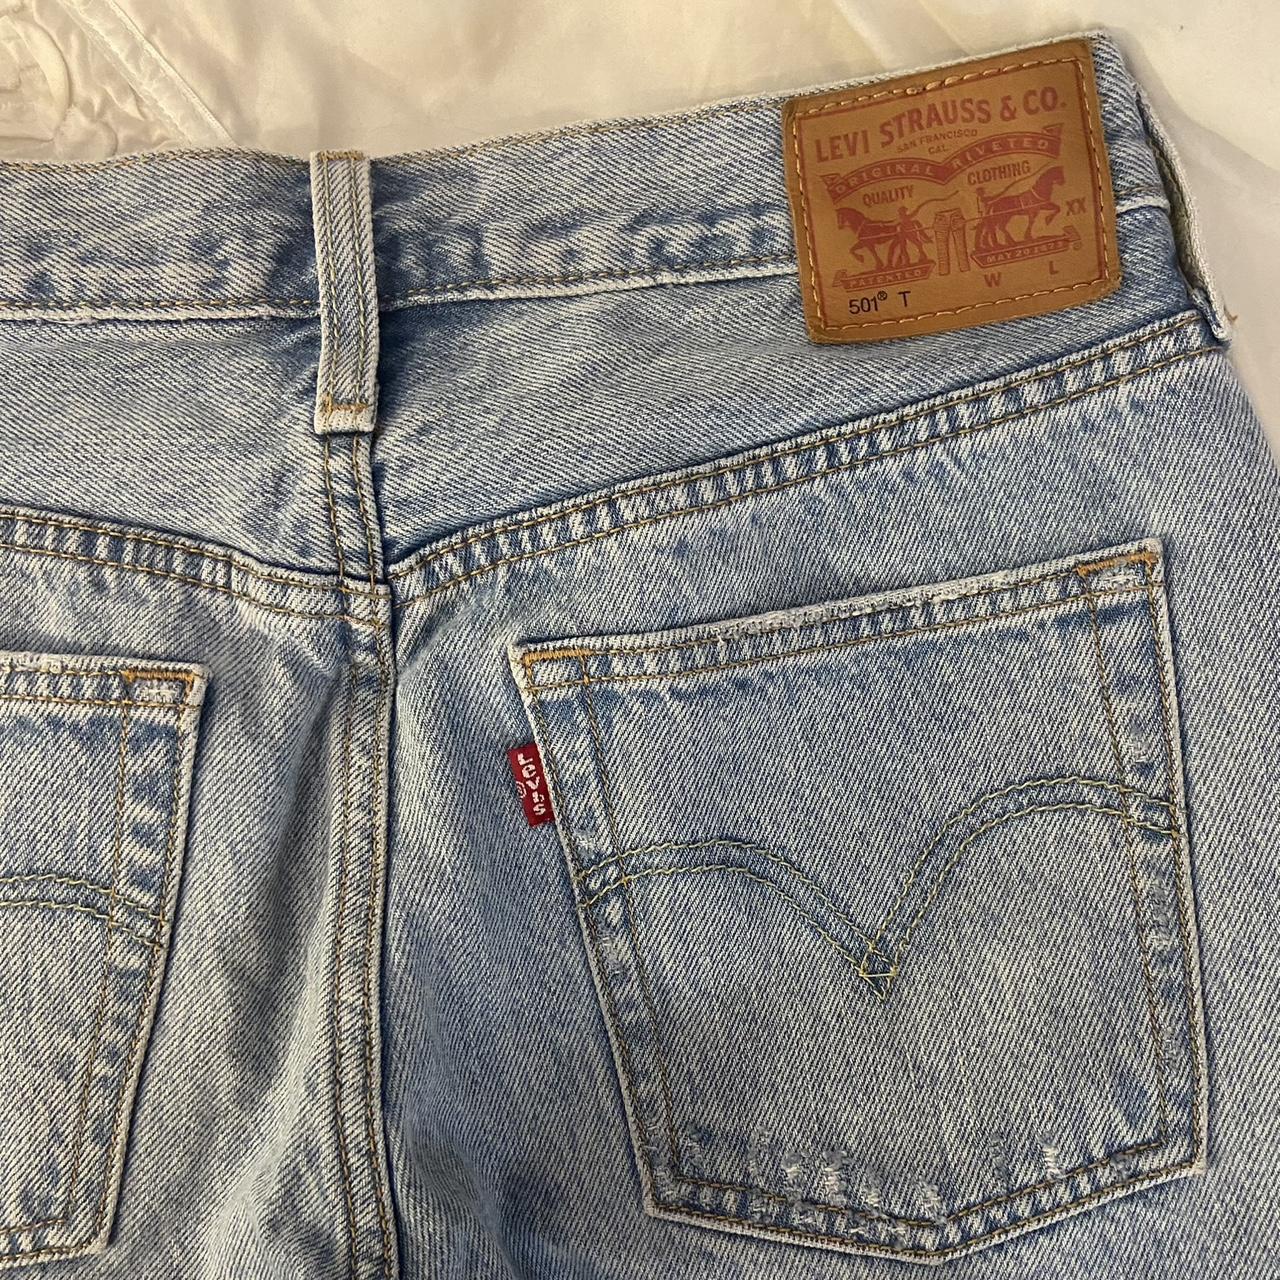 Levi's Women's Blue and Navy Jeans